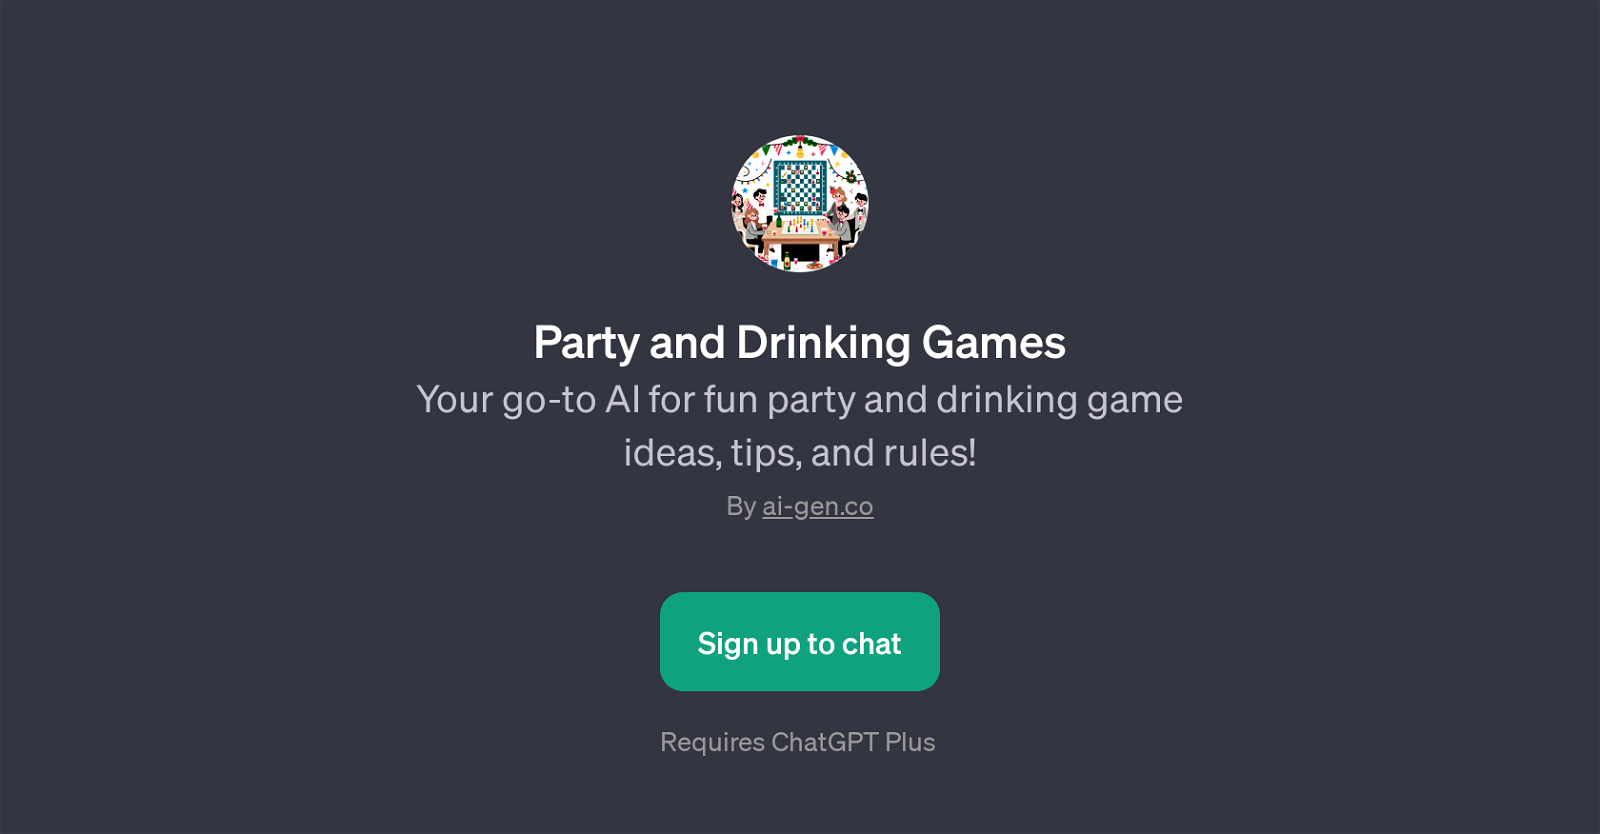 Party and Drinking Games GPT website